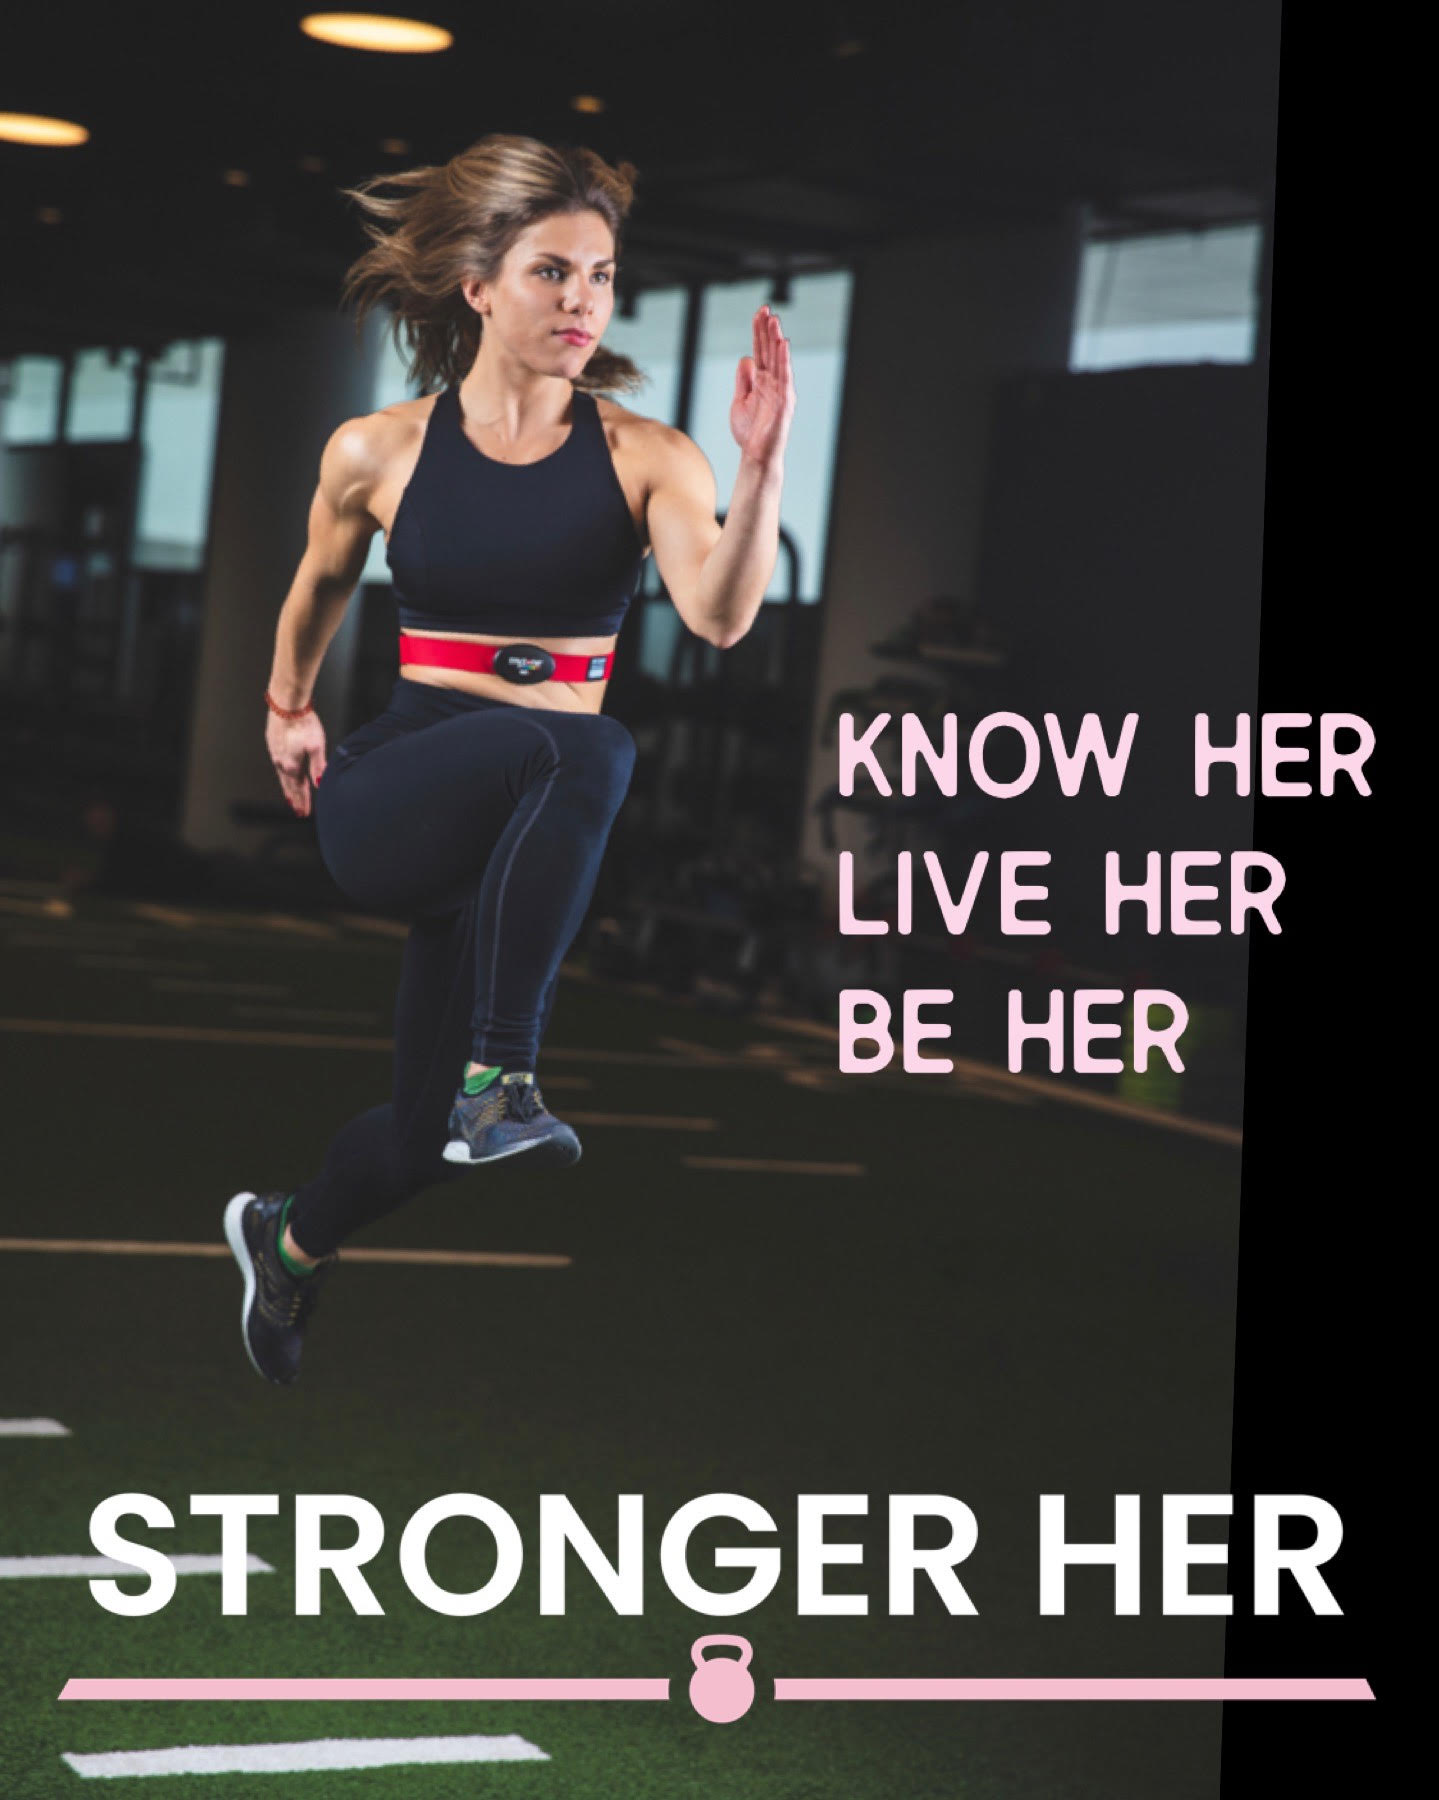 Miami Athletic Club Stronger Her woman running